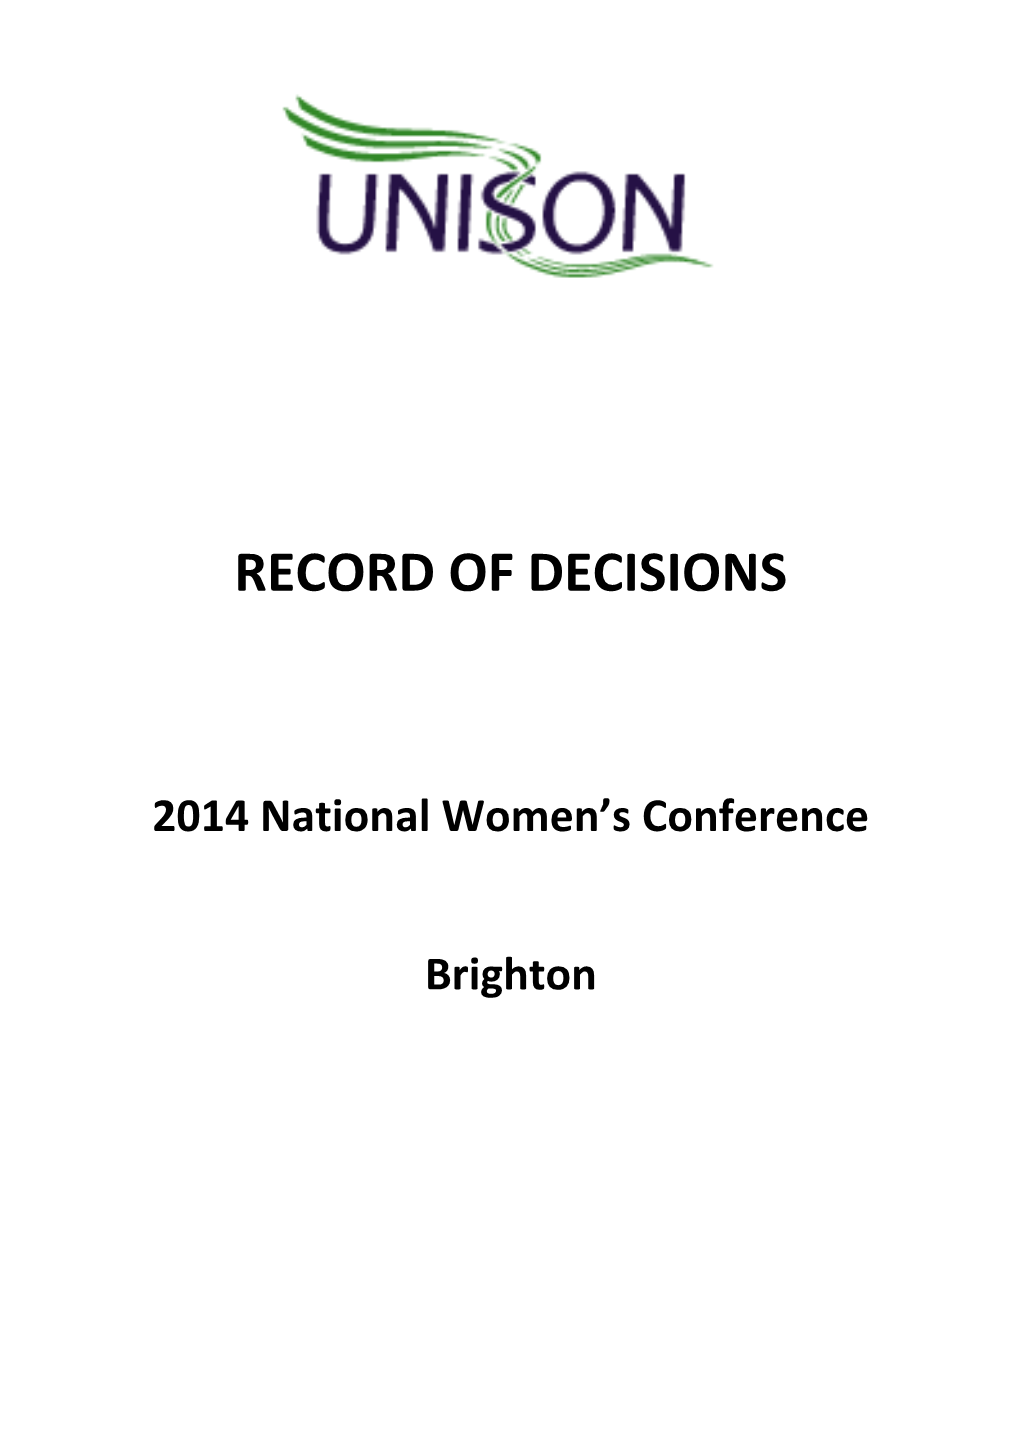 2014 National Women's Conference - Record of Decisions